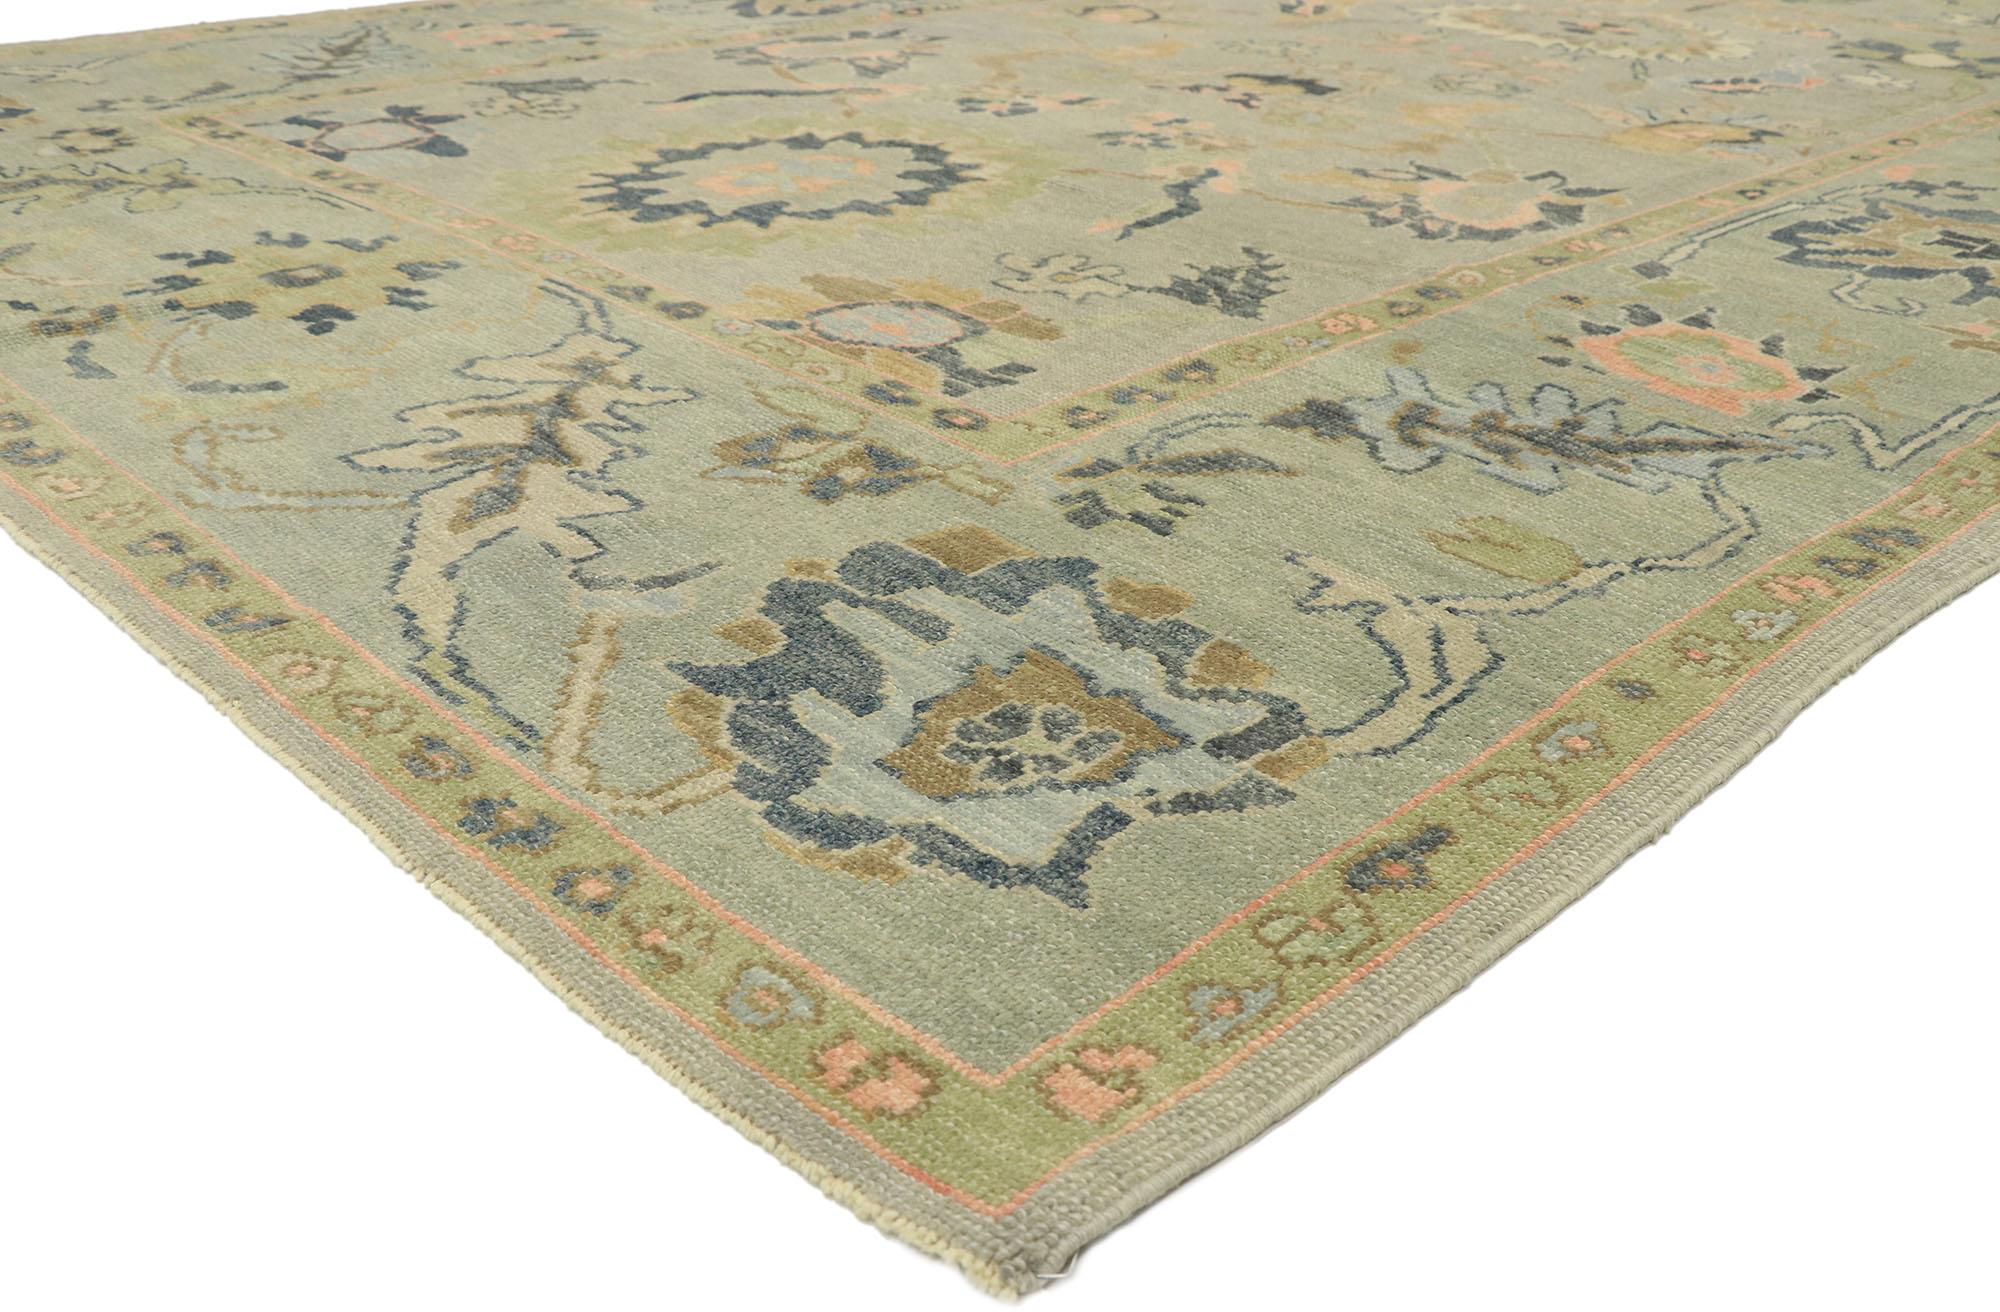 52913 New Contemporary Turkish Oushak rug with Modern Transitional style. Blending elements from the modern world with light and airy colors, this hand knotted wool contemporary Turkish Oushak rug will boost the coziness factor in nearly any space.